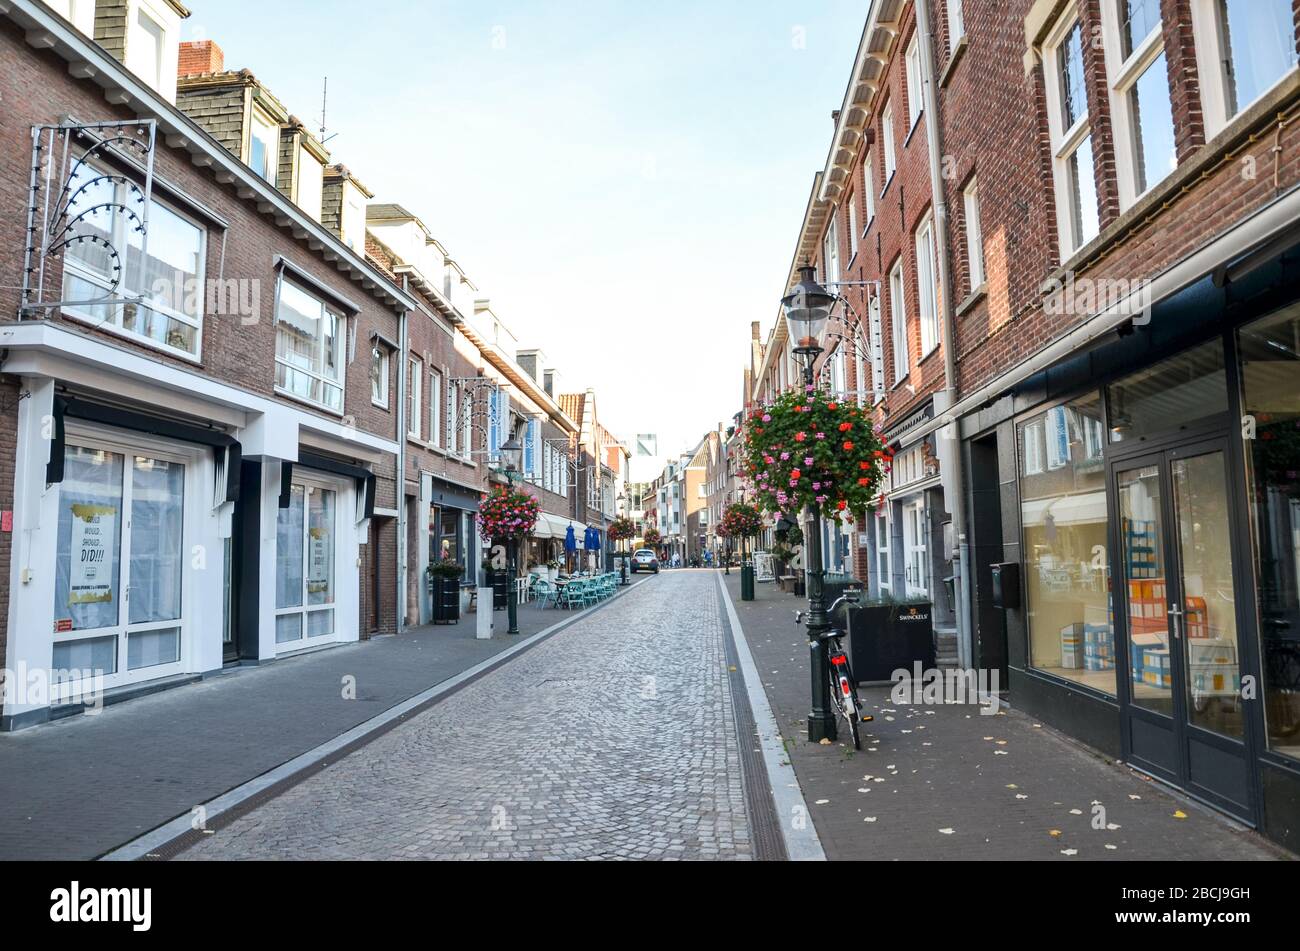 Venlo, Limburg, Netherlands - October 13, 2018: Empty street with no people in the historical center of the Dutch city. Closed shops, restaurants, and cafes. Stock Photo